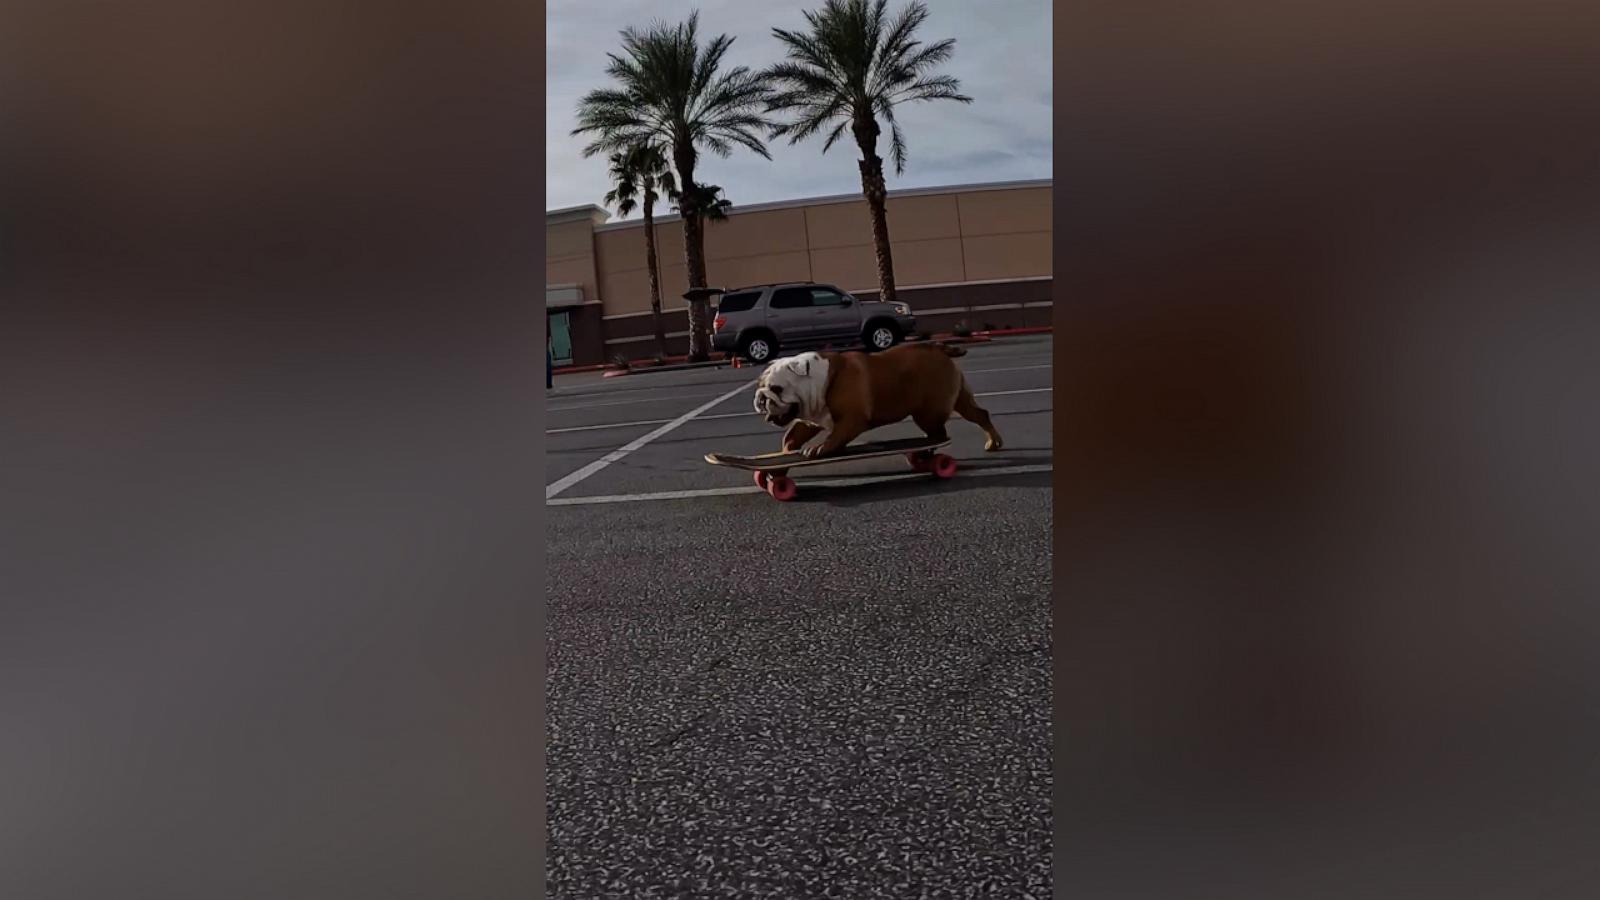 VIDEO: Check out this dog's moves on a skateboard